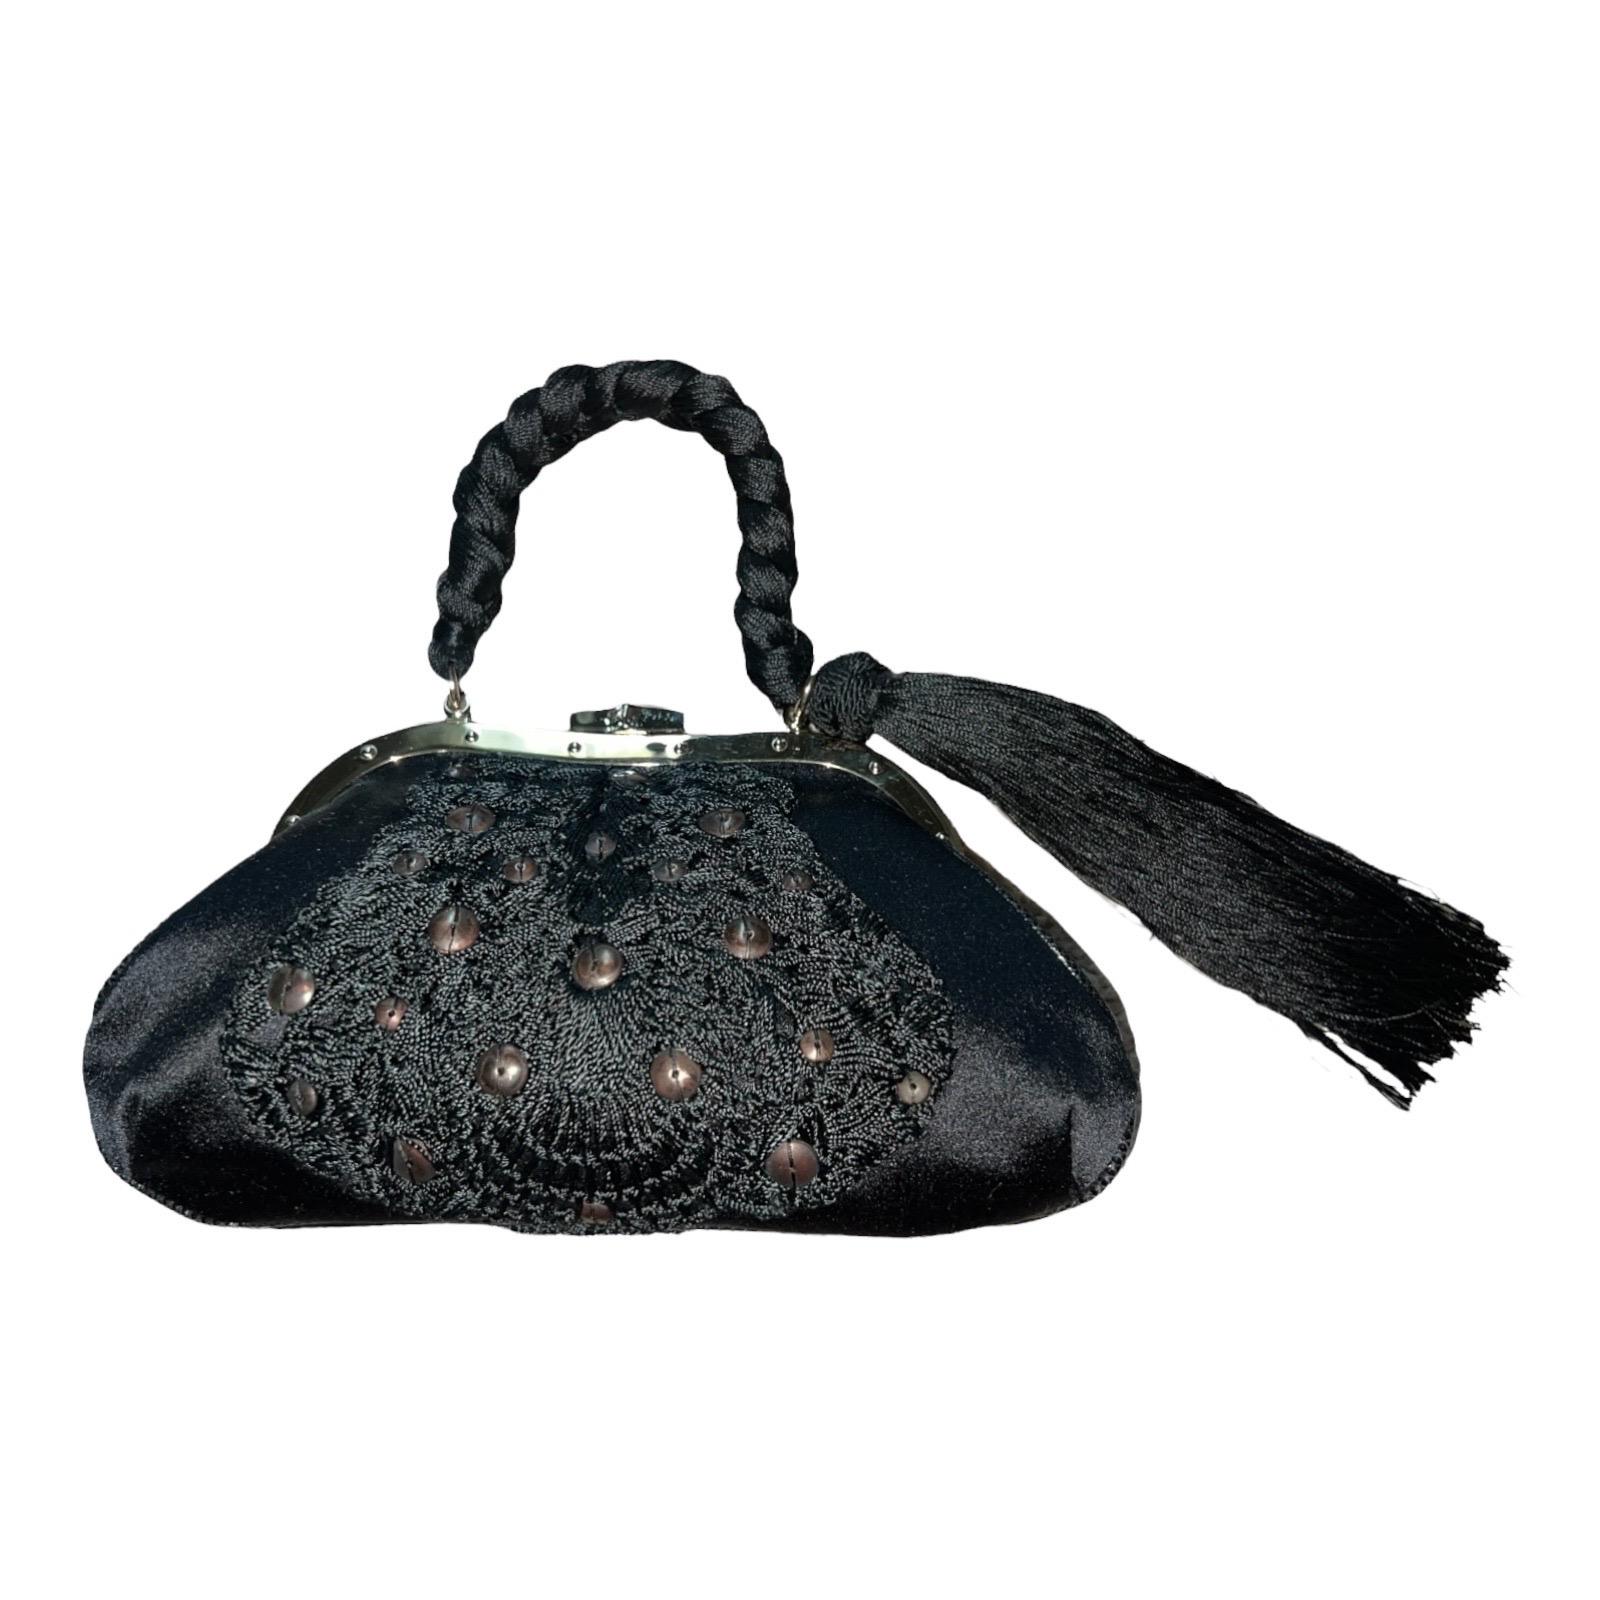 A GUCCI signature piece that will last you for many years
Timeless classic - a true beauty!
Very rare Collector's item - only very few pieces were made and sold in selected boutiques
Made of beautiful black satin fabric 
Artistic embroidery with